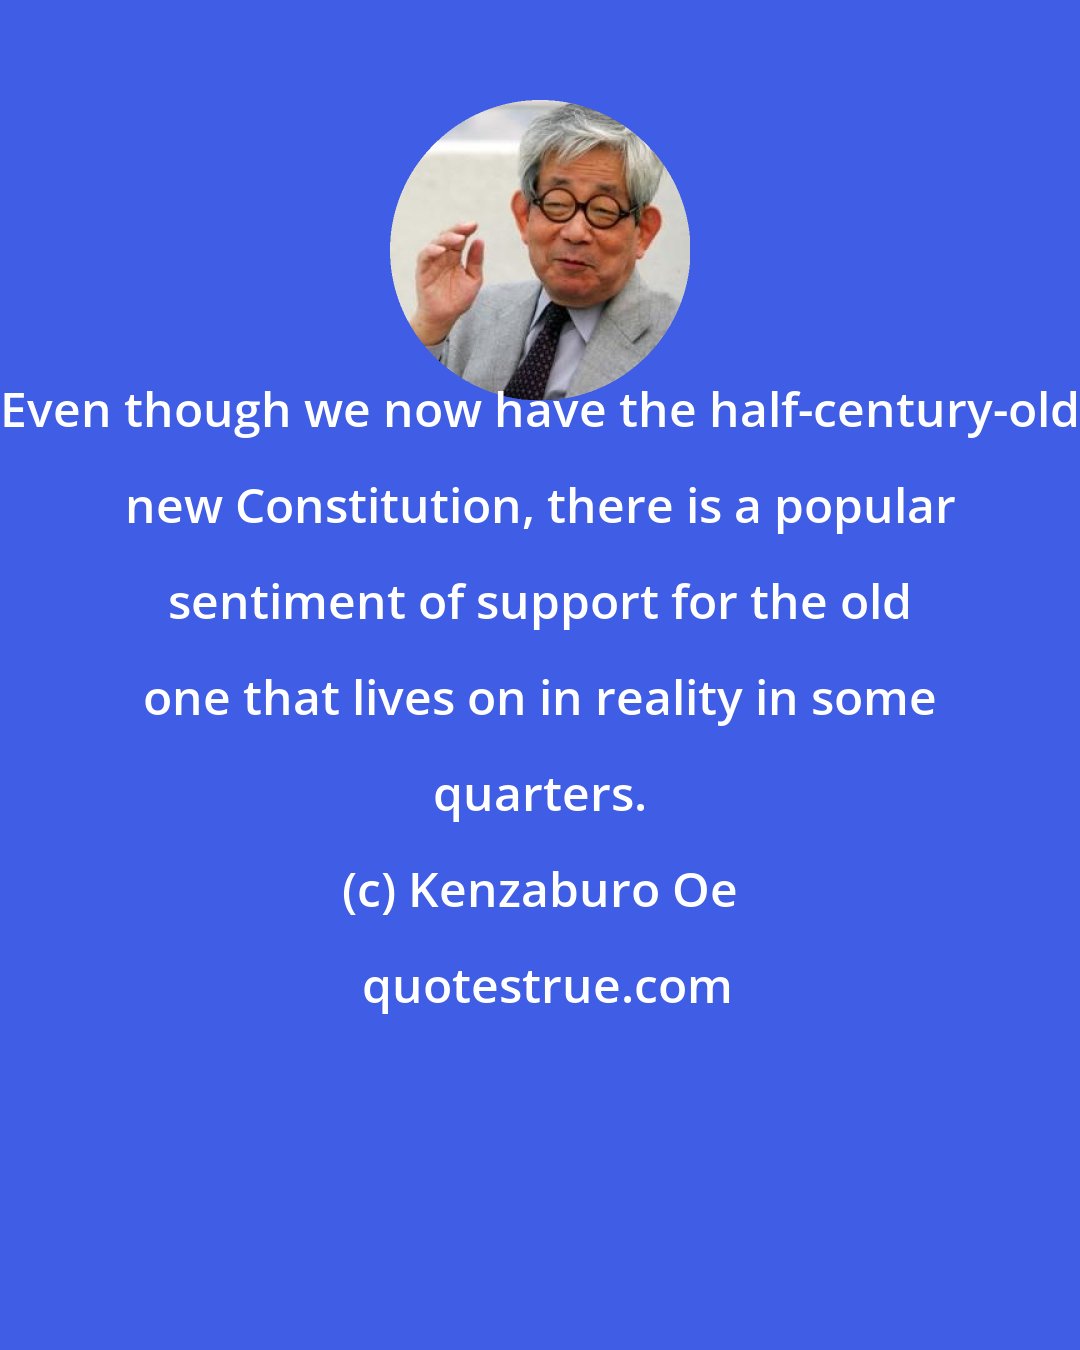 Kenzaburo Oe: Even though we now have the half-century-old new Constitution, there is a popular sentiment of support for the old one that lives on in reality in some quarters.